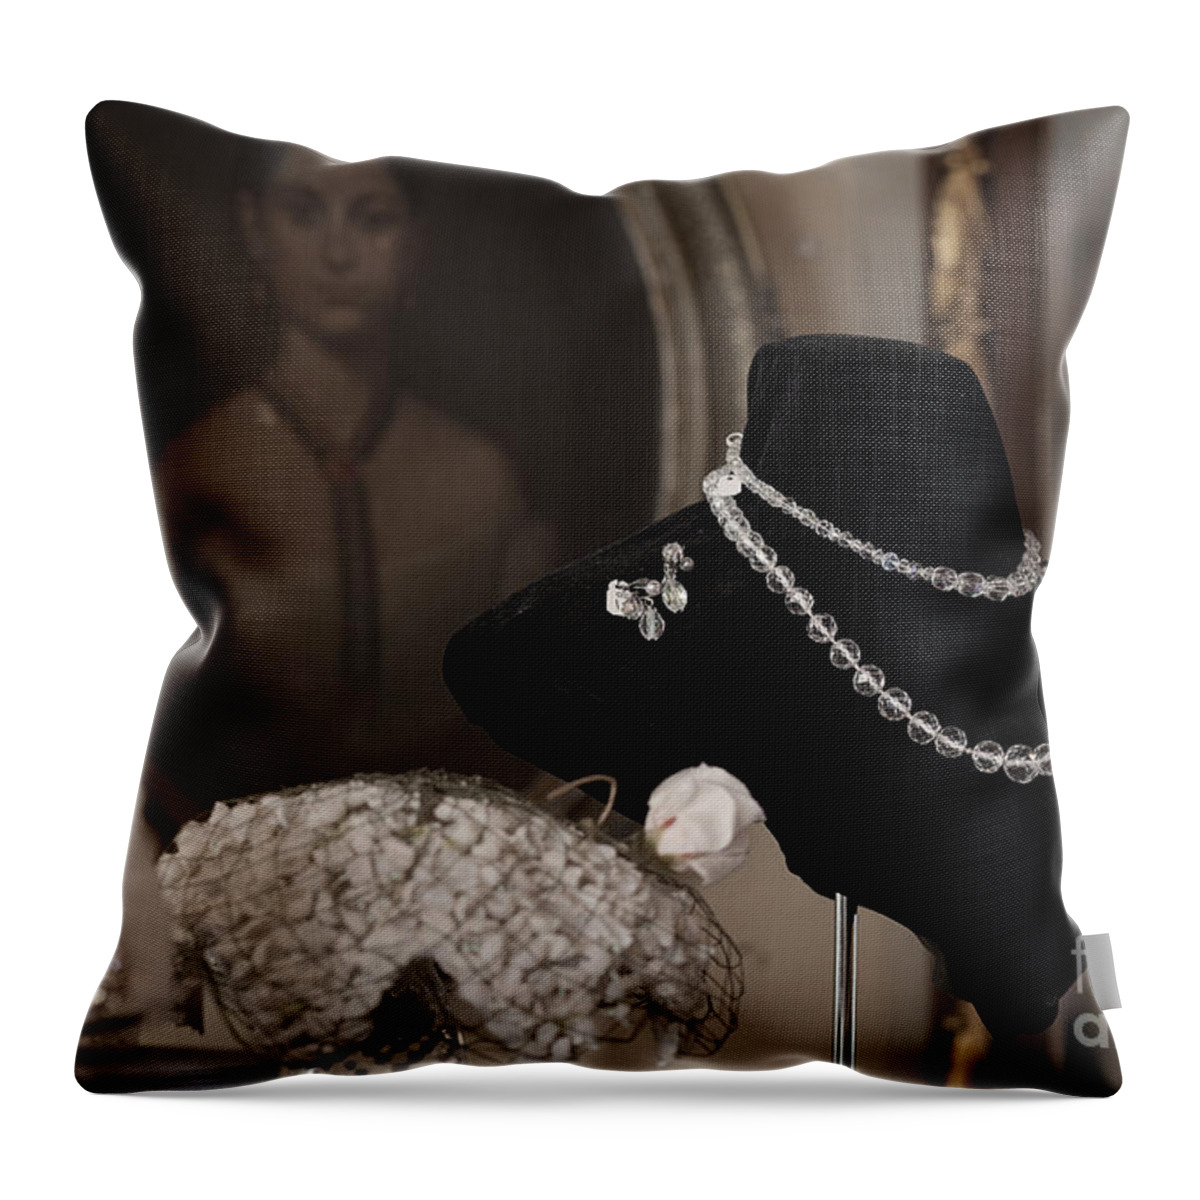 Old Stuff Throw Pillow featuring the photograph The Old Shop by Jim Garrison